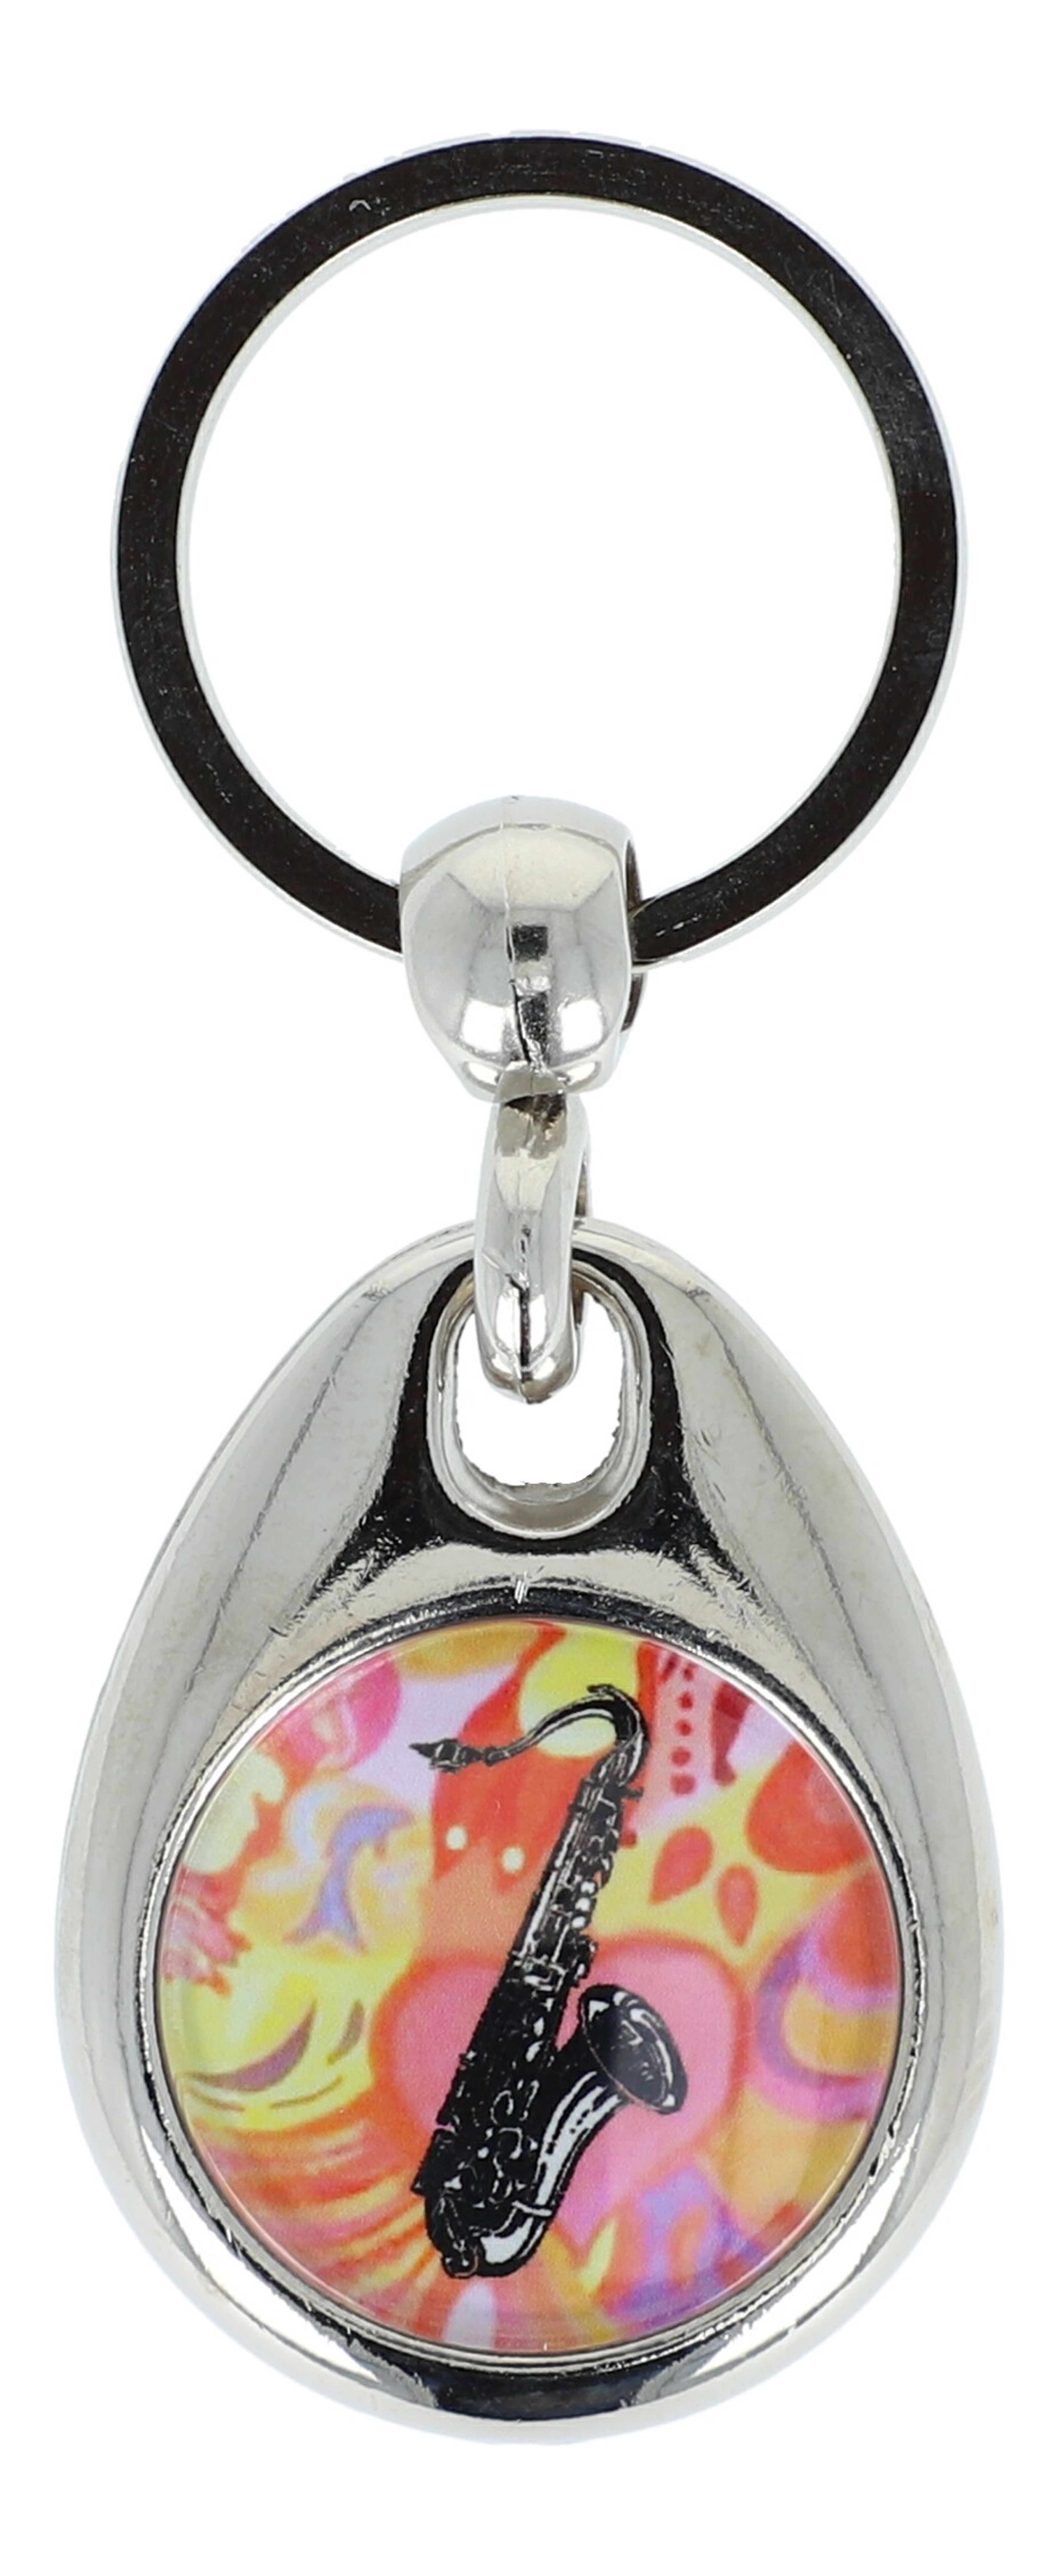 Buy wholesale colorful keychains with instruments and musical motifs  (double-sided)